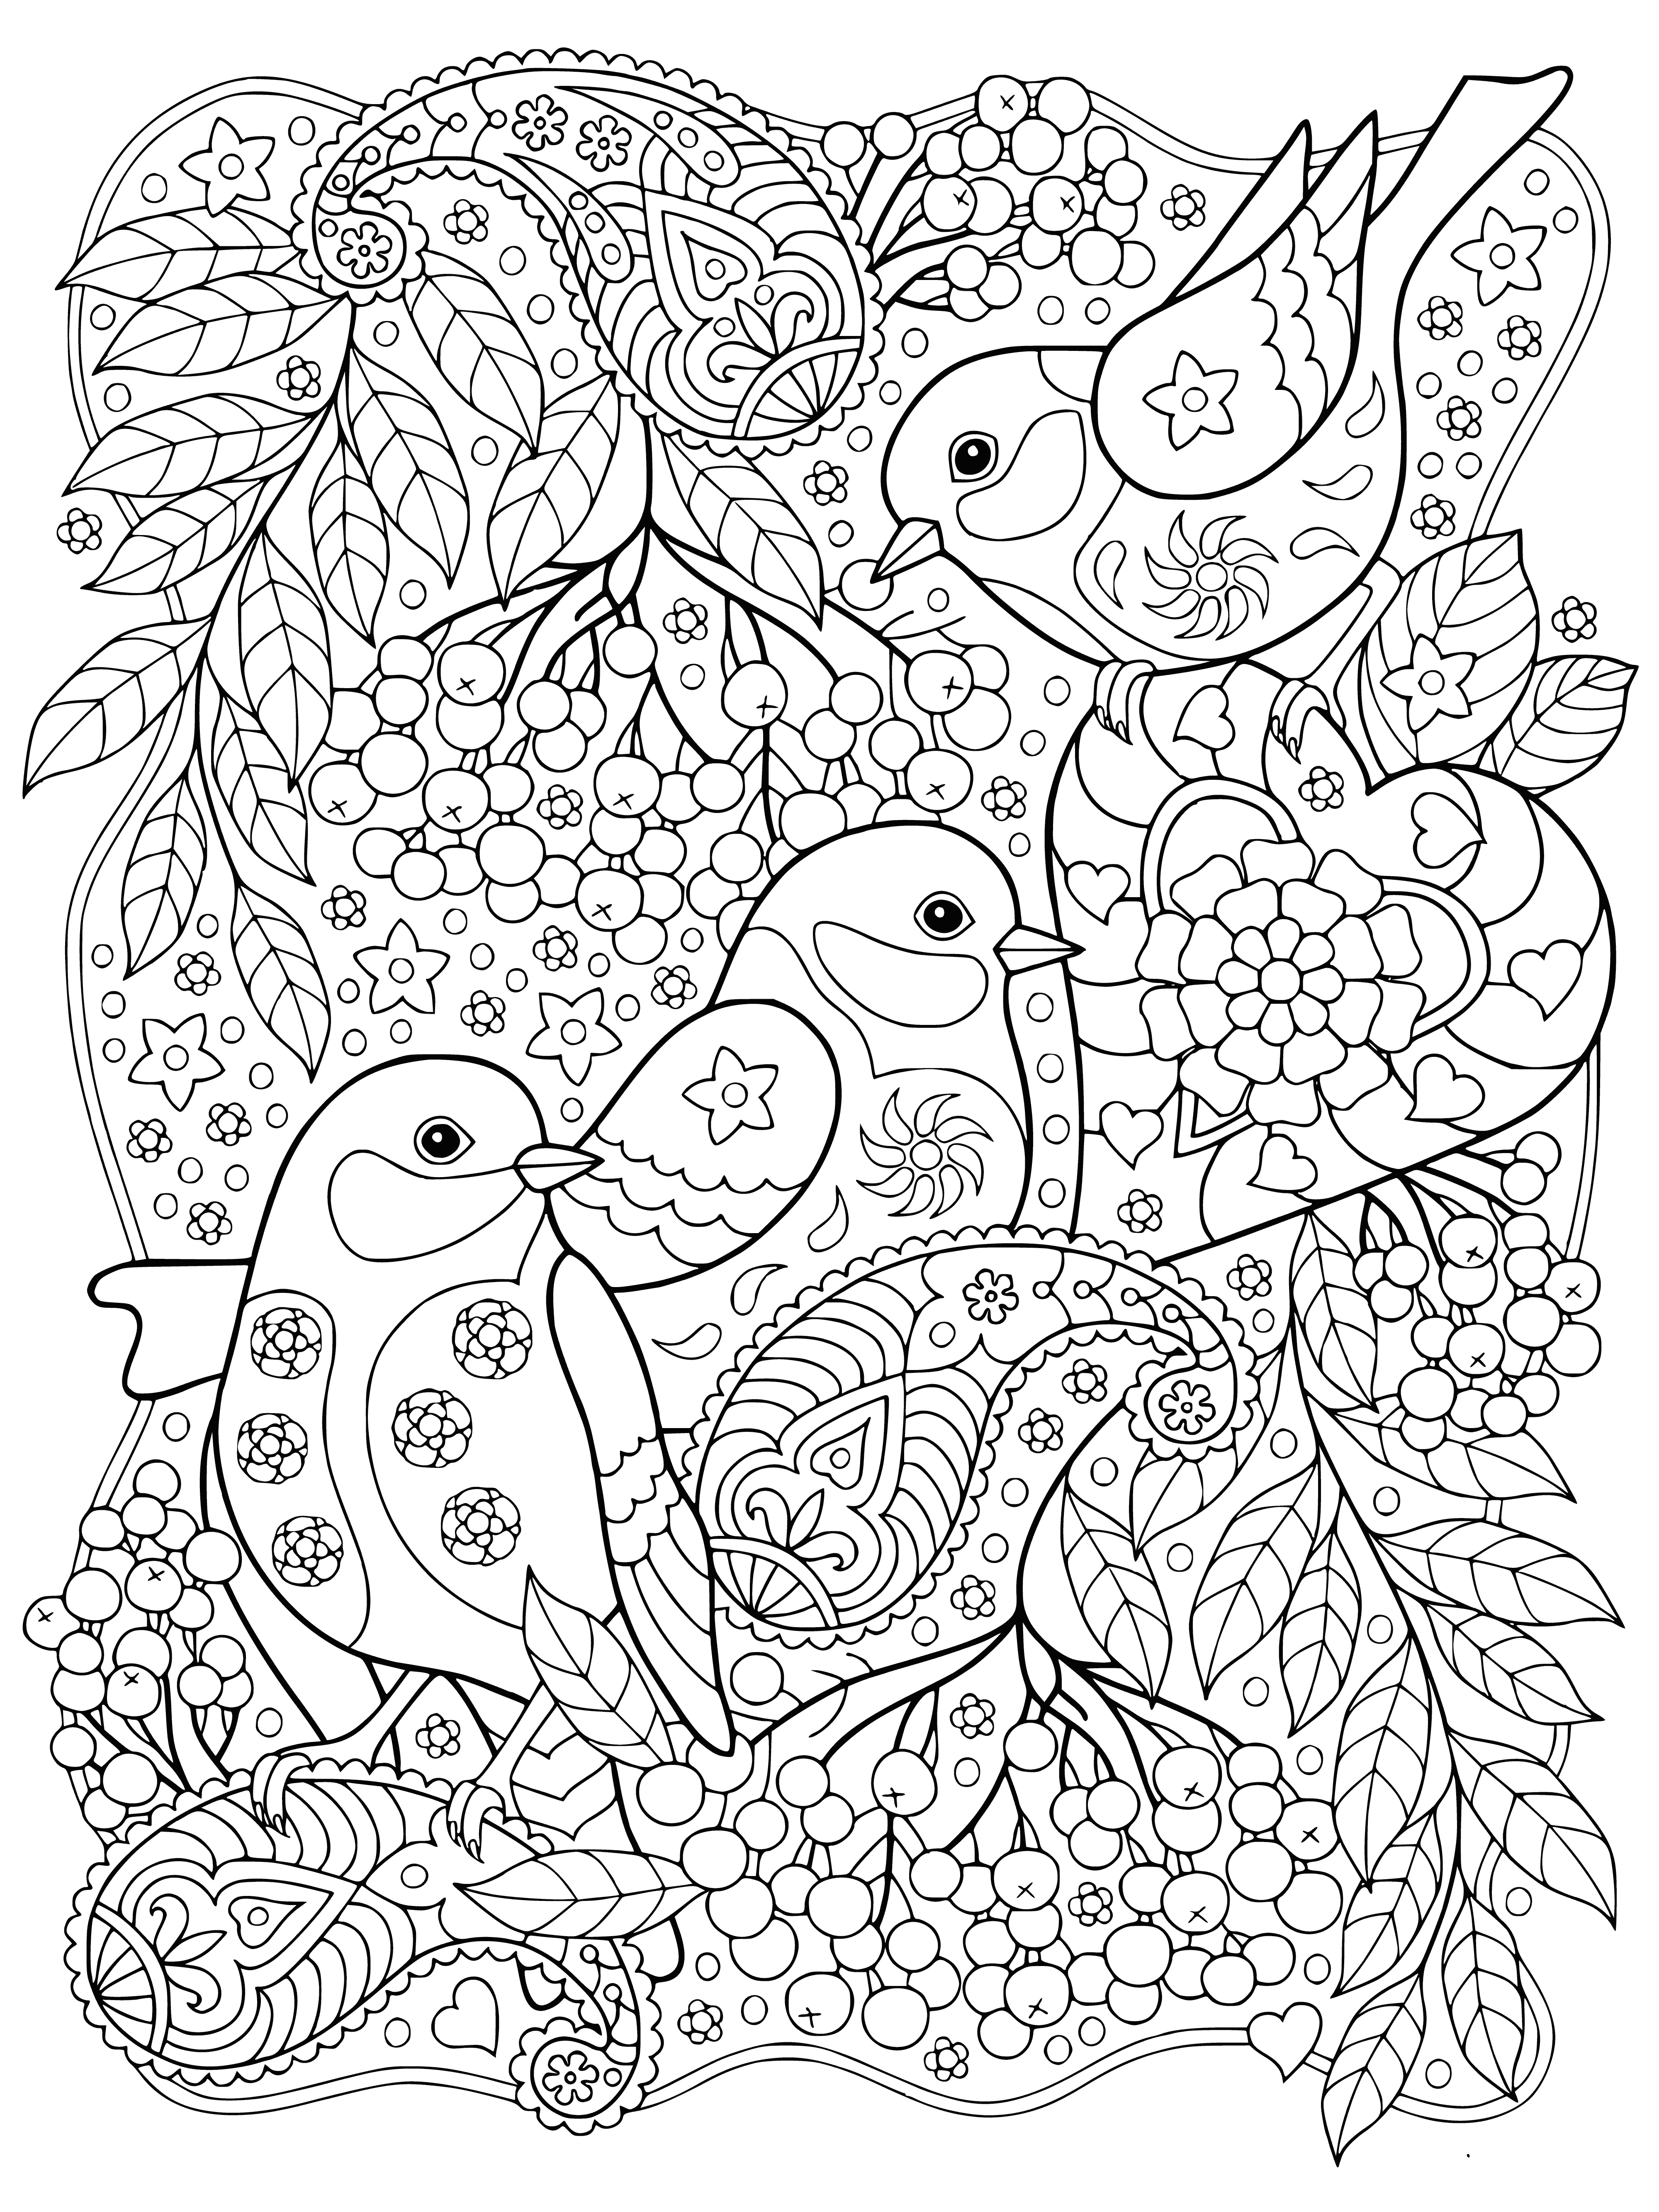 coloring page: Birds of different colors perched on a rowan tree branch visible with its leaves & berries.